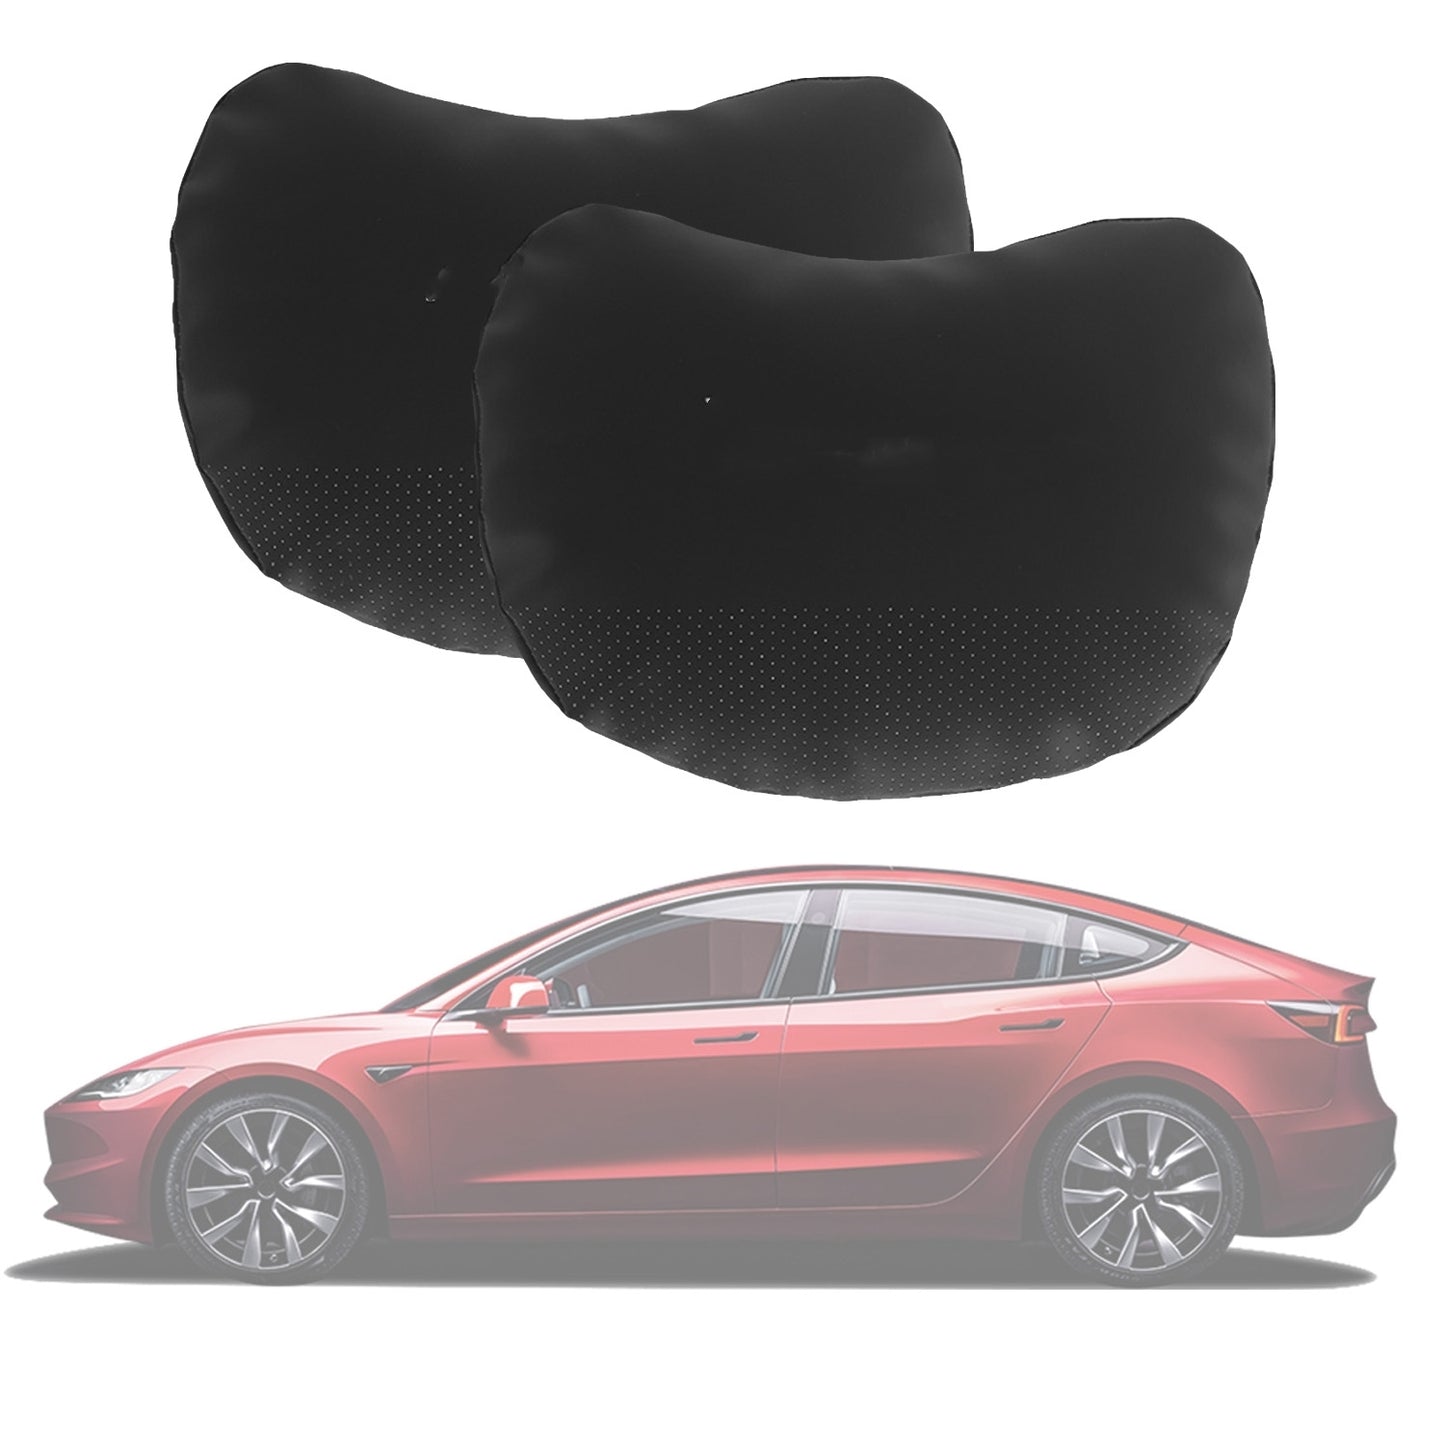 Headrest Pillow for Tesla Model 3 Model Y,Tesla Neck Pillow with Genuine  Nappa Leather,Soft Pillow for Relieving Stiffness,Memory Foam Tesla